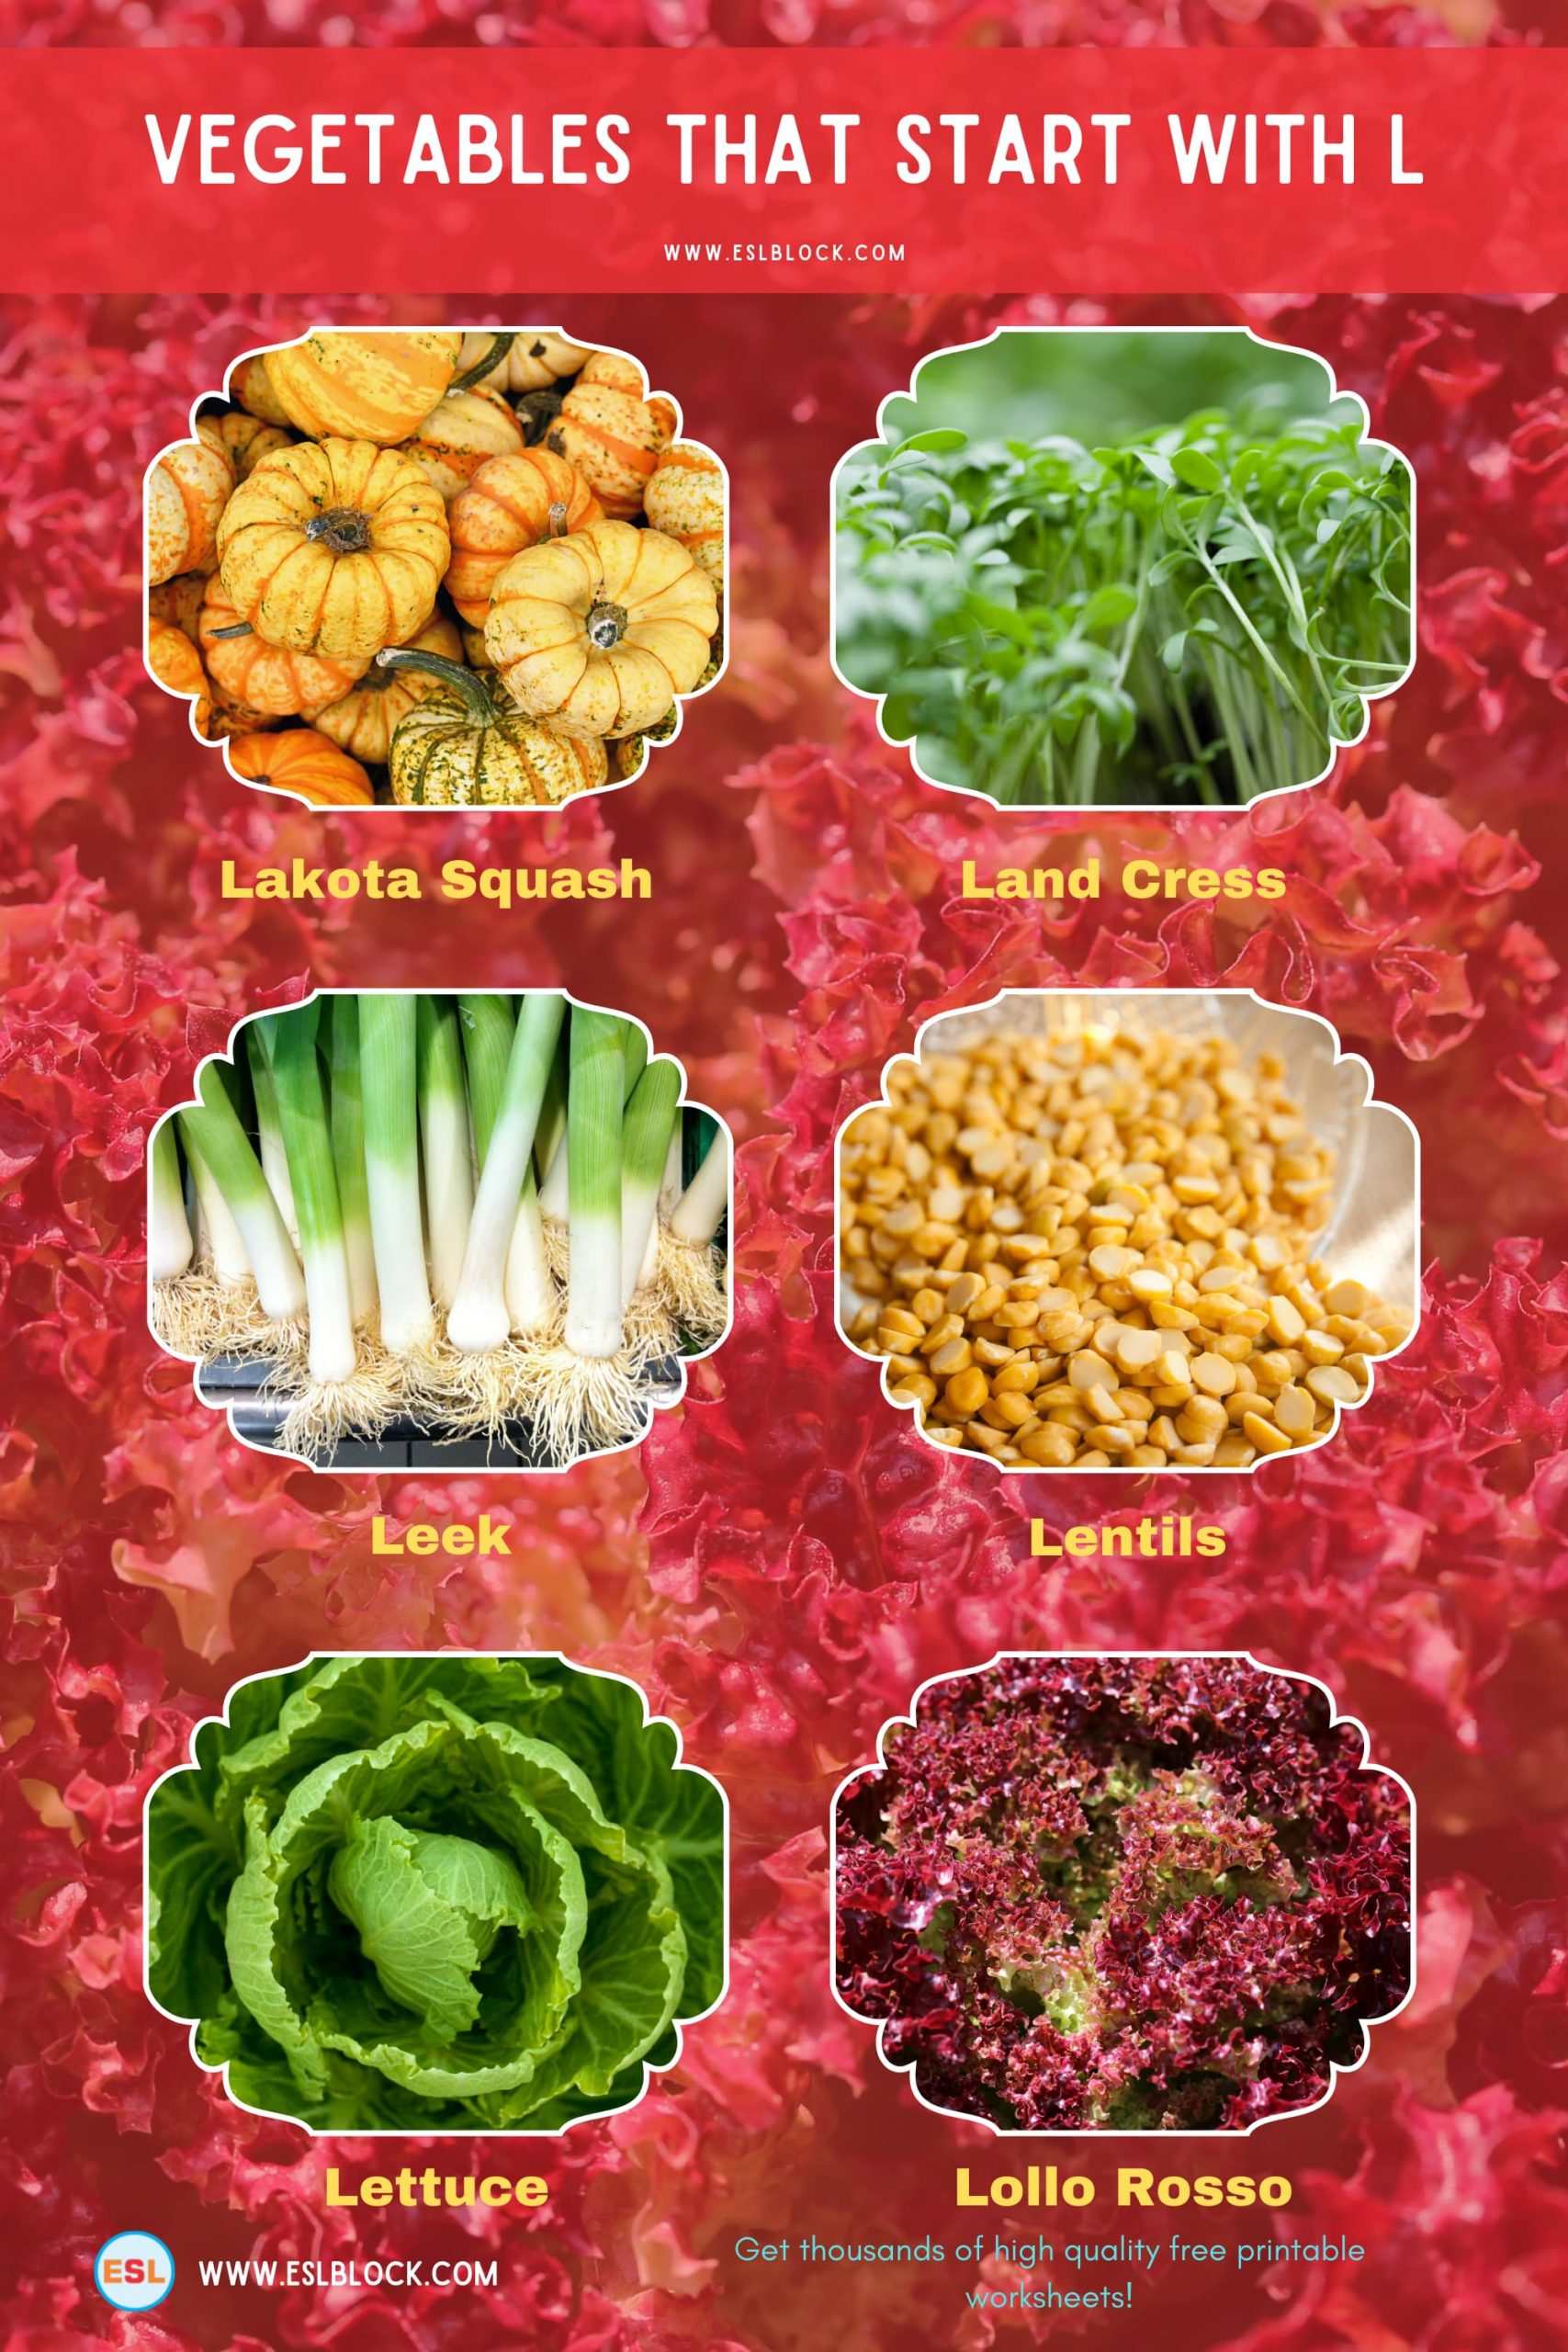 5 Letter Vegetables Starting With L, English, English Nouns, English Vocabulary, English Words, L Vegetables, L Vegetables in English, L Vegetables Names, List of Vegetables That Start With L, Nouns, Vegetables List, Vegetables Names, Vegetables That Begins With L, Vegetables That Start With L, Vocabulary